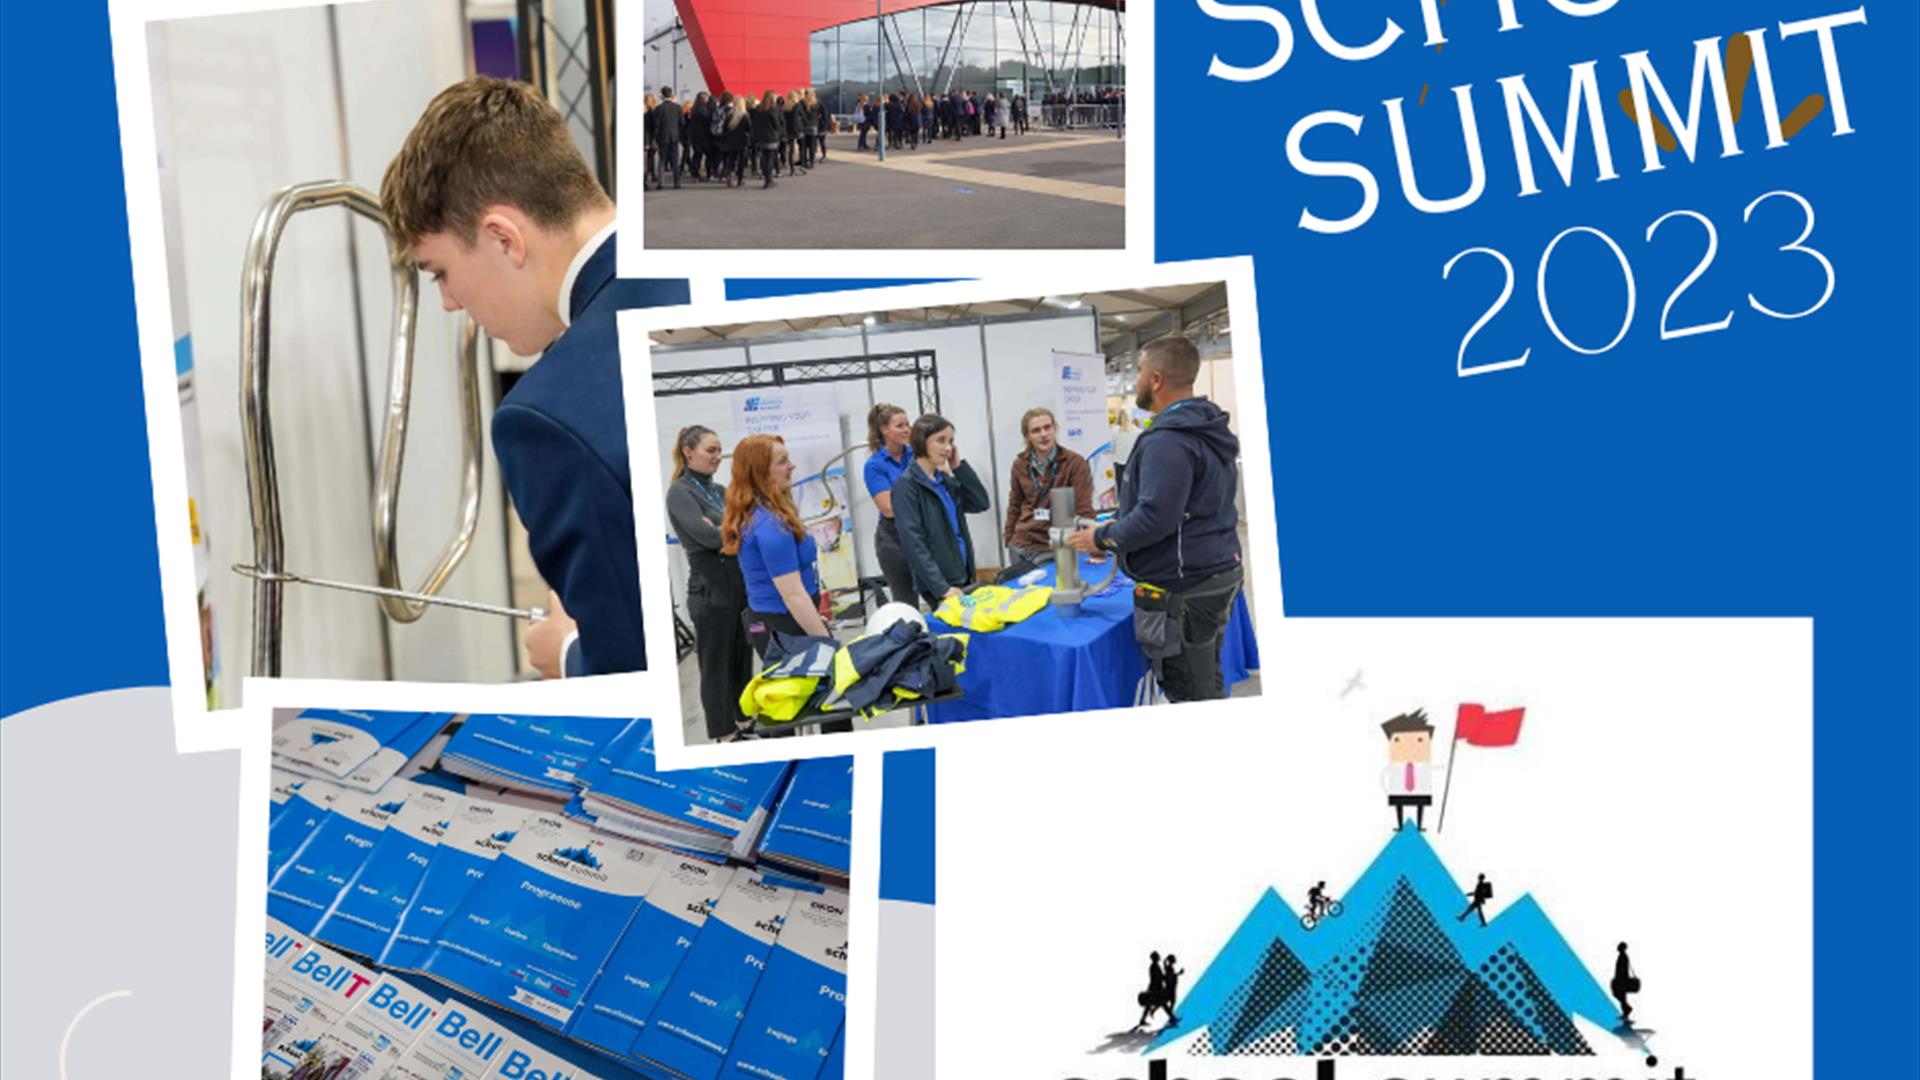 School Summit 23 promotional collage with logo and picture of school children outside Eikon Centre